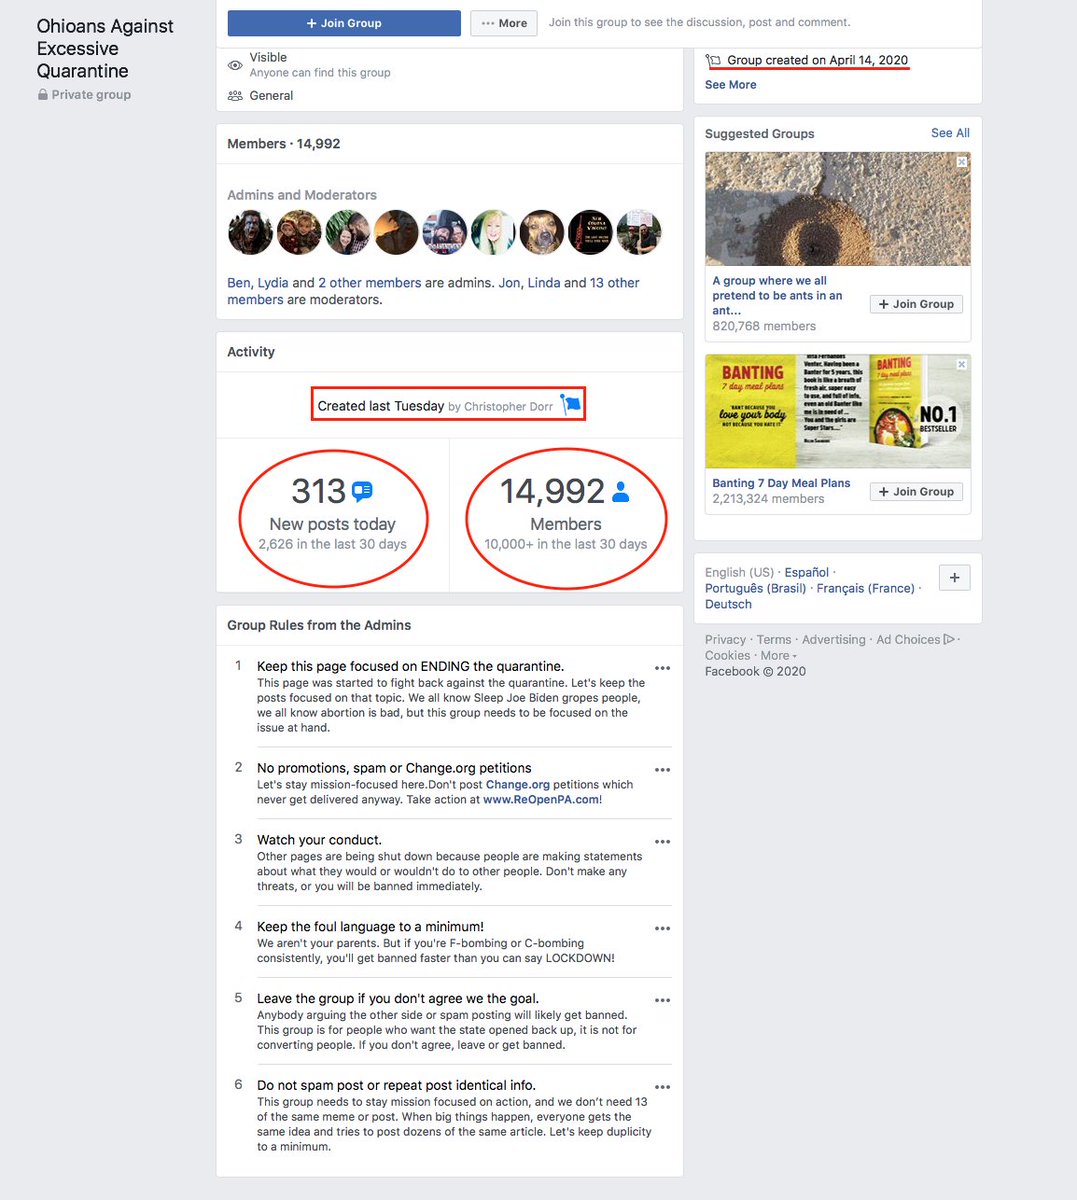 'Ohioans Against Excessive Quarantine' Facebook Group created by Christopher Dorr, April 14, 2020 Redirect from www[.]REOpen[.]Ohio[.]com link lands at Dorr Brothers 'Ohio Gun Owners' website.https://action[.]ohiogunowners[.]org/action/end-the-excessive-quarantine/